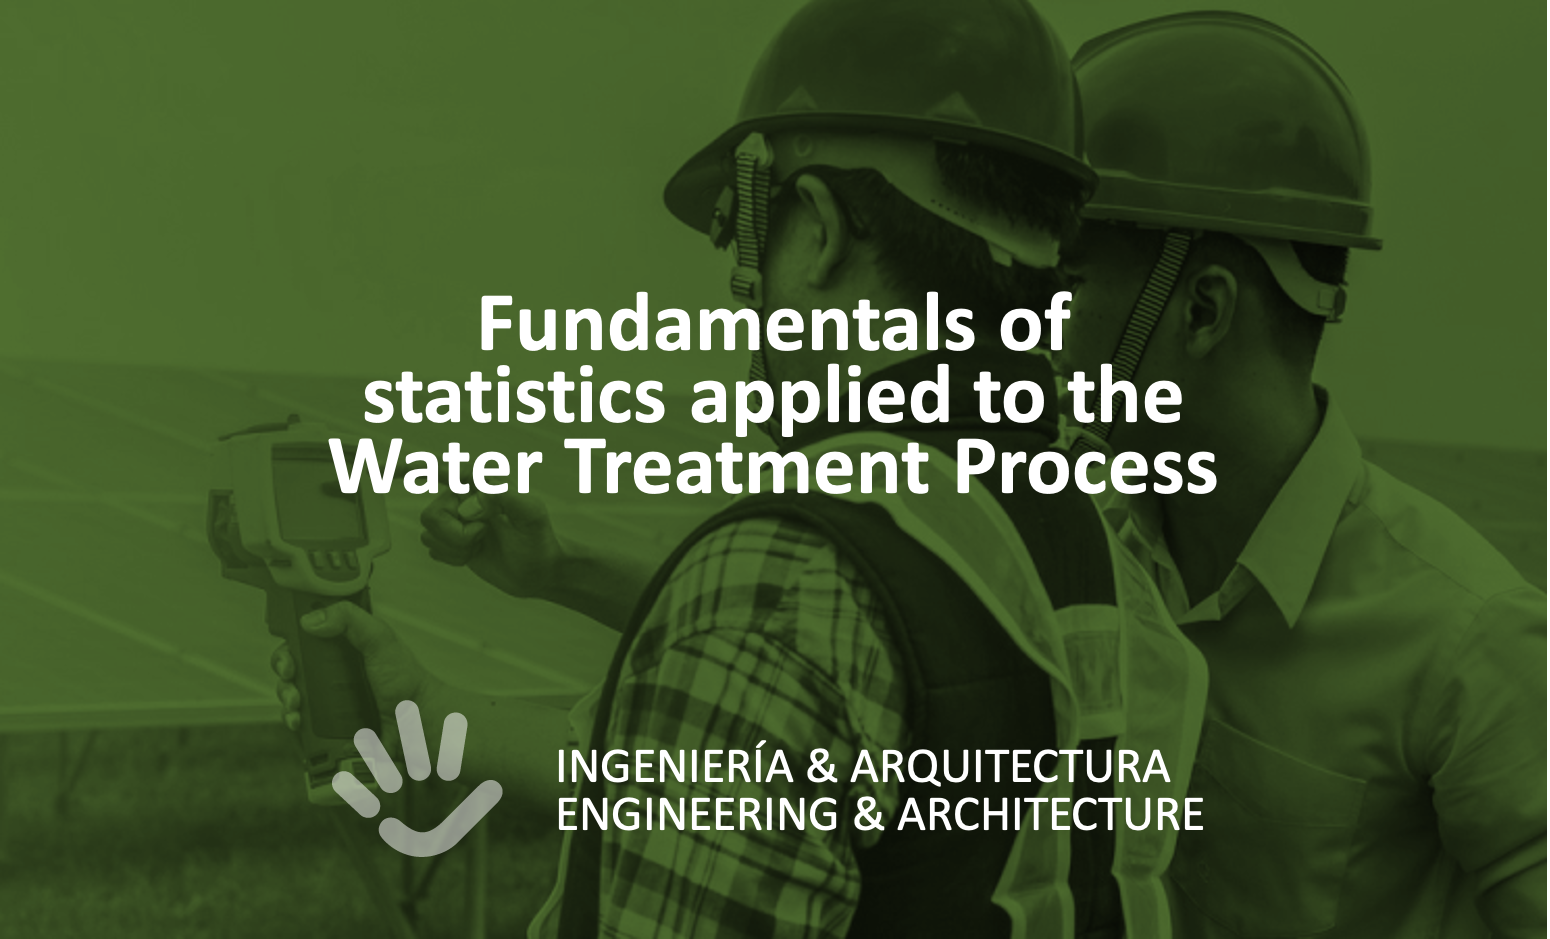 Funamentals of statistics applied to the Water Treatment Process